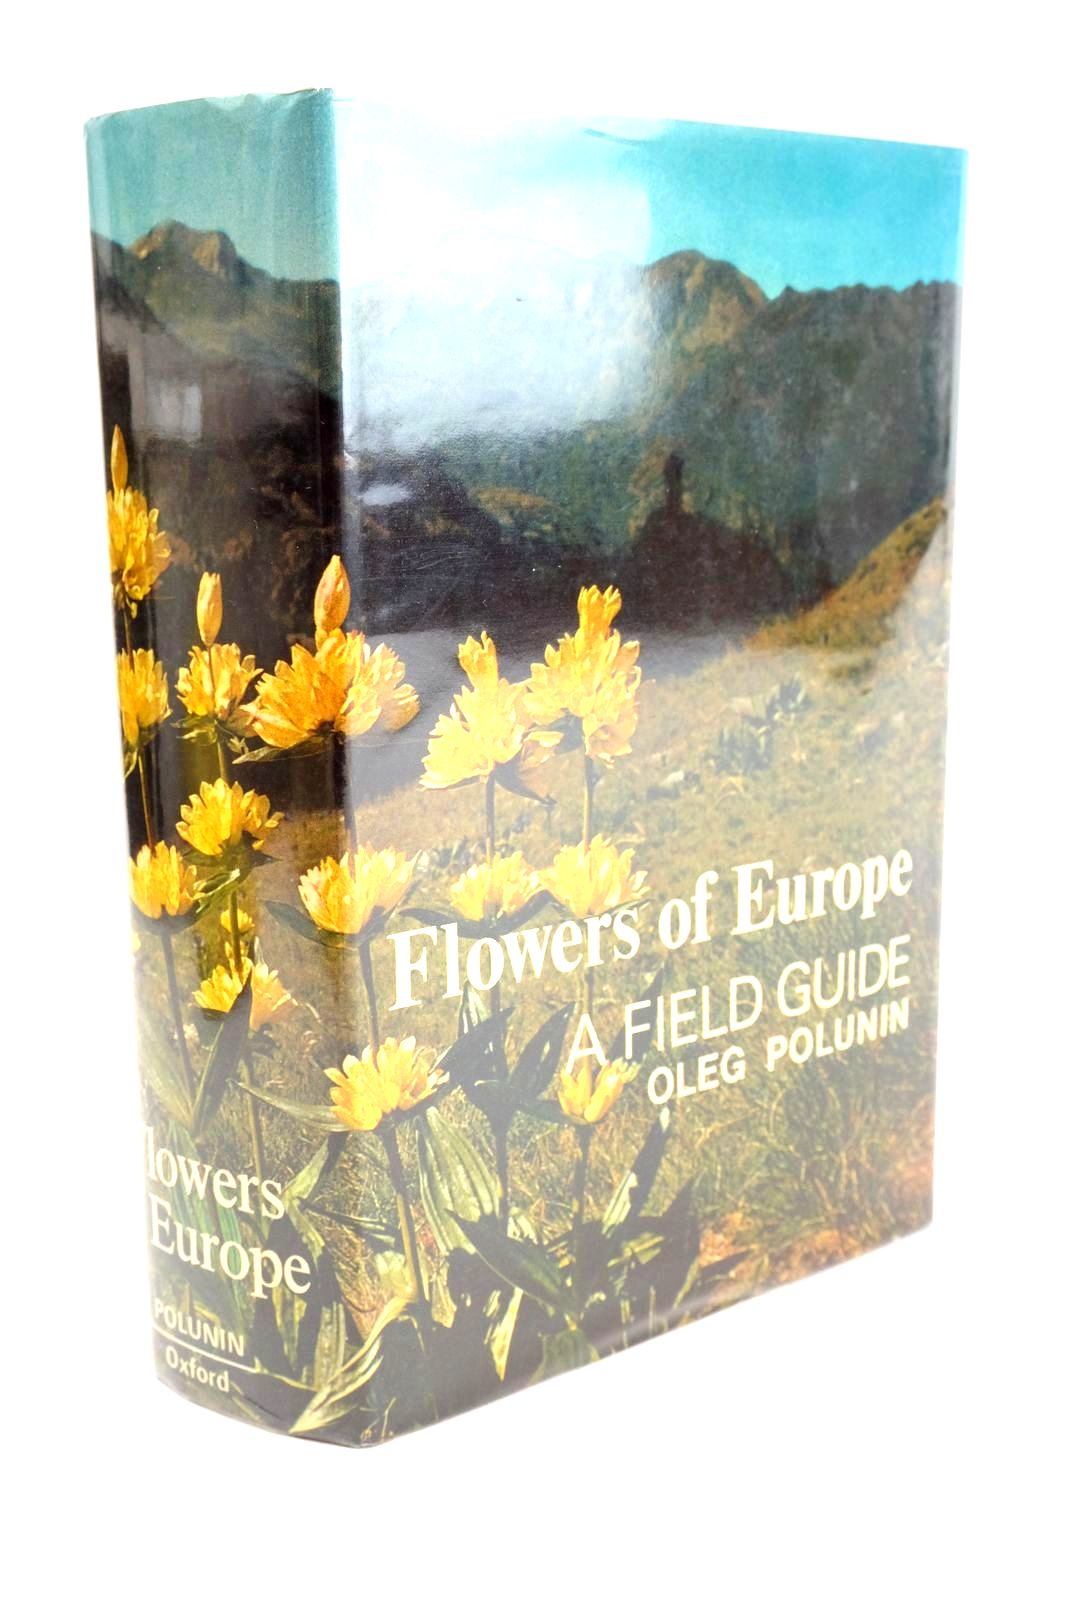 Photo of FLOWERS OF EUROPE: A FIELD GUIDE written by Polunin, Oleg illustrated by Everard, Barbara published by Oxford University Press (STOCK CODE: 1324991)  for sale by Stella & Rose's Books